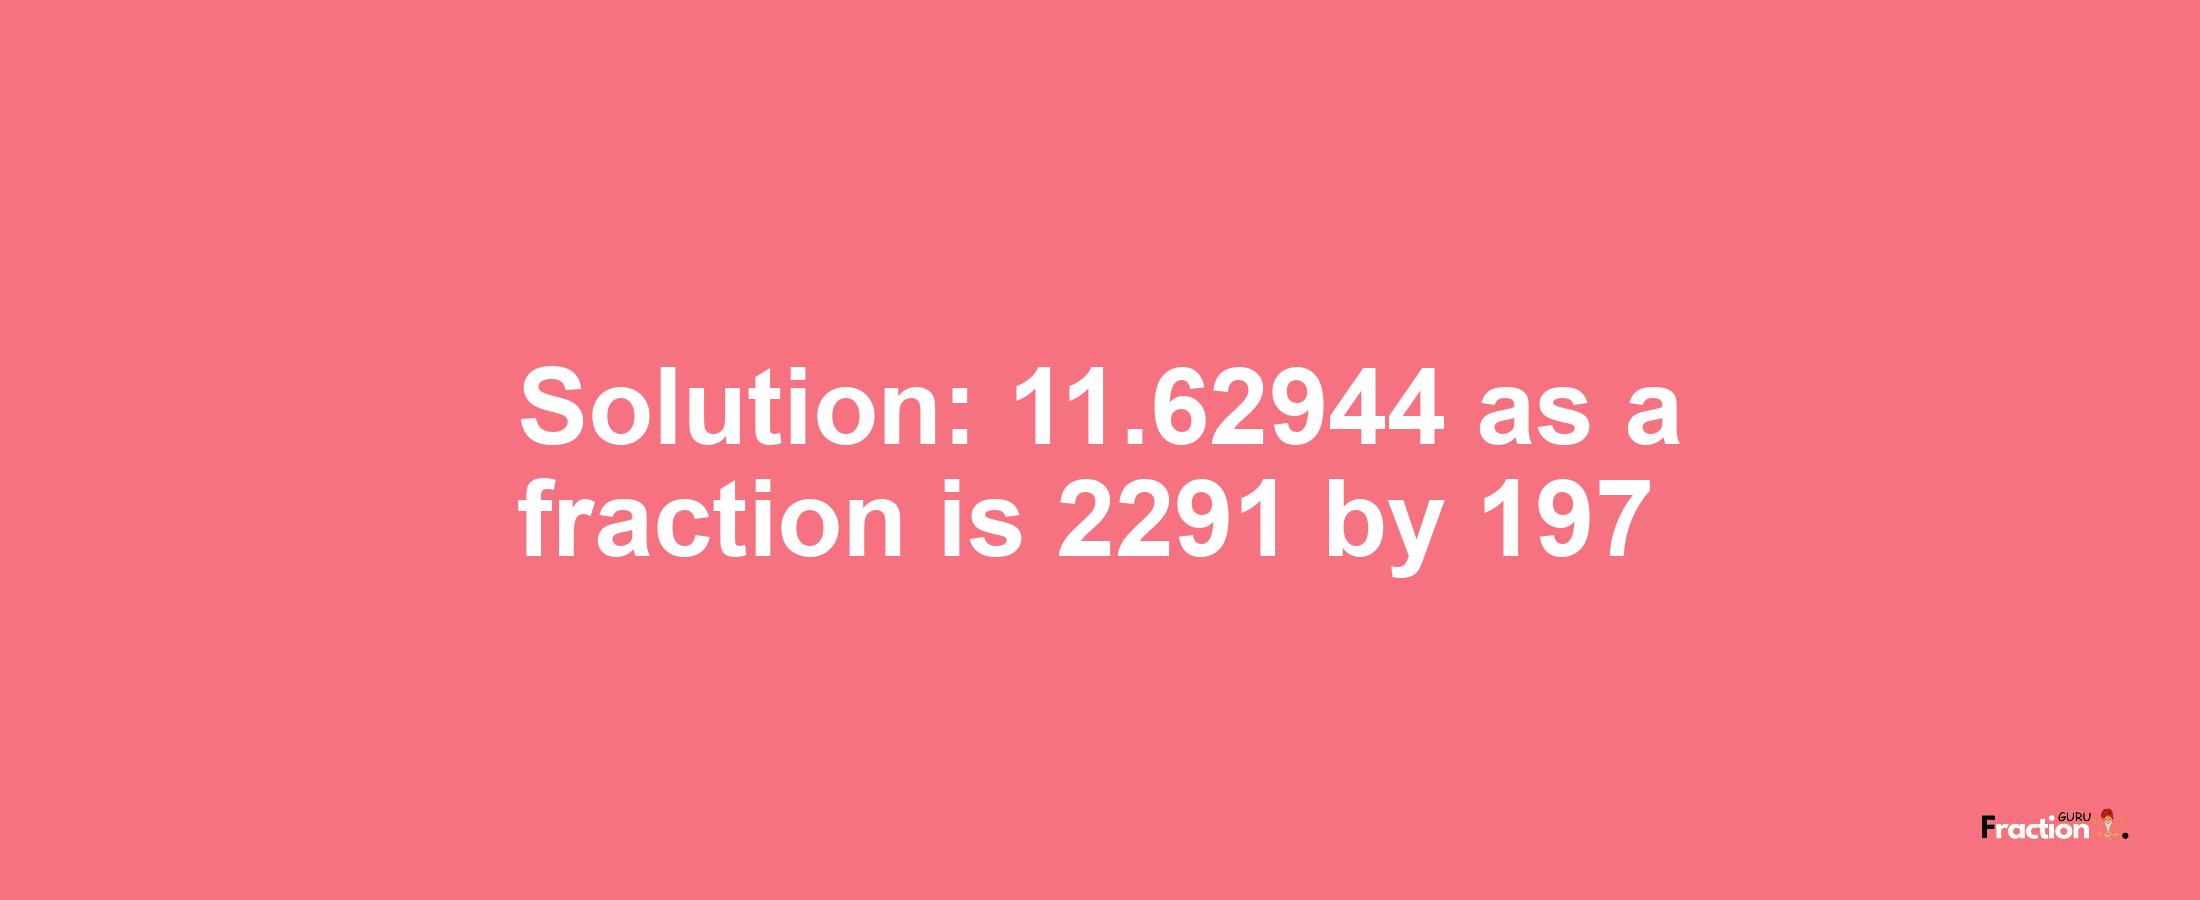 Solution:11.62944 as a fraction is 2291/197